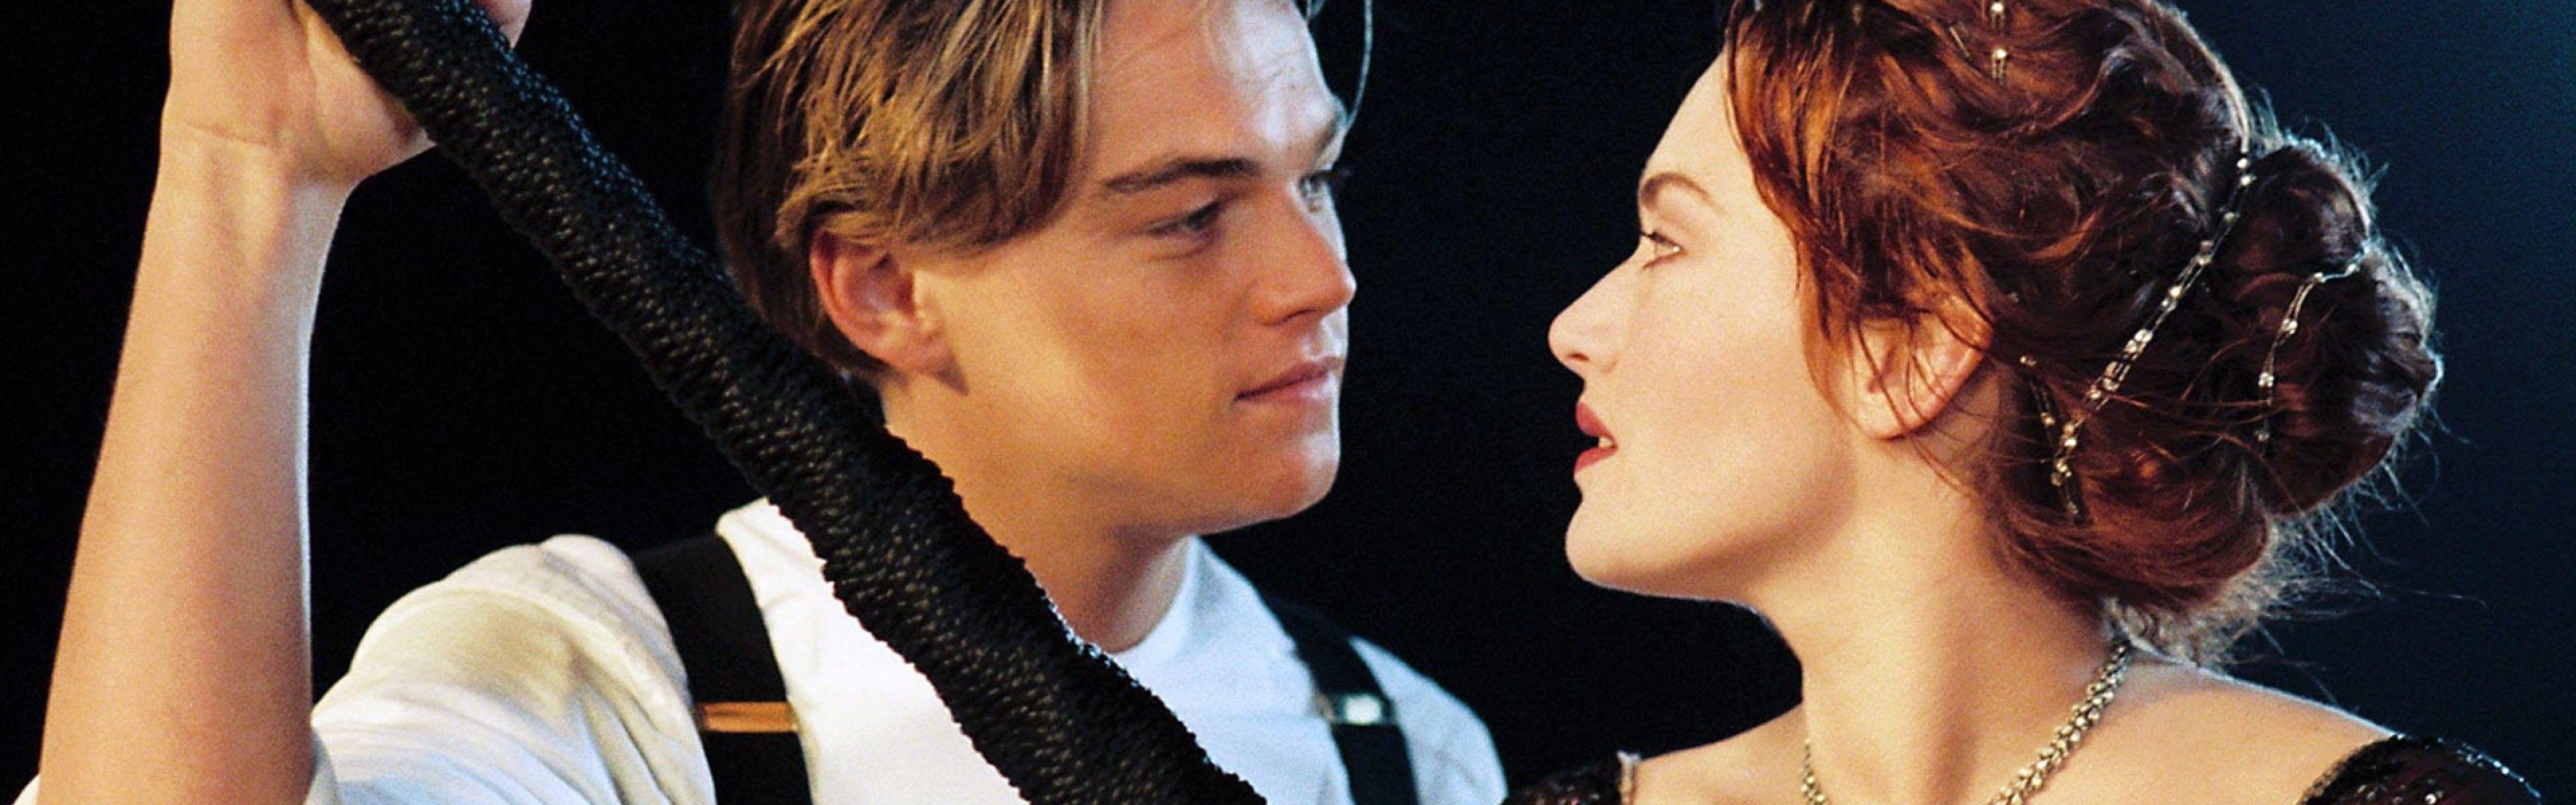 Kate Winslet Wallpapers Titanic.